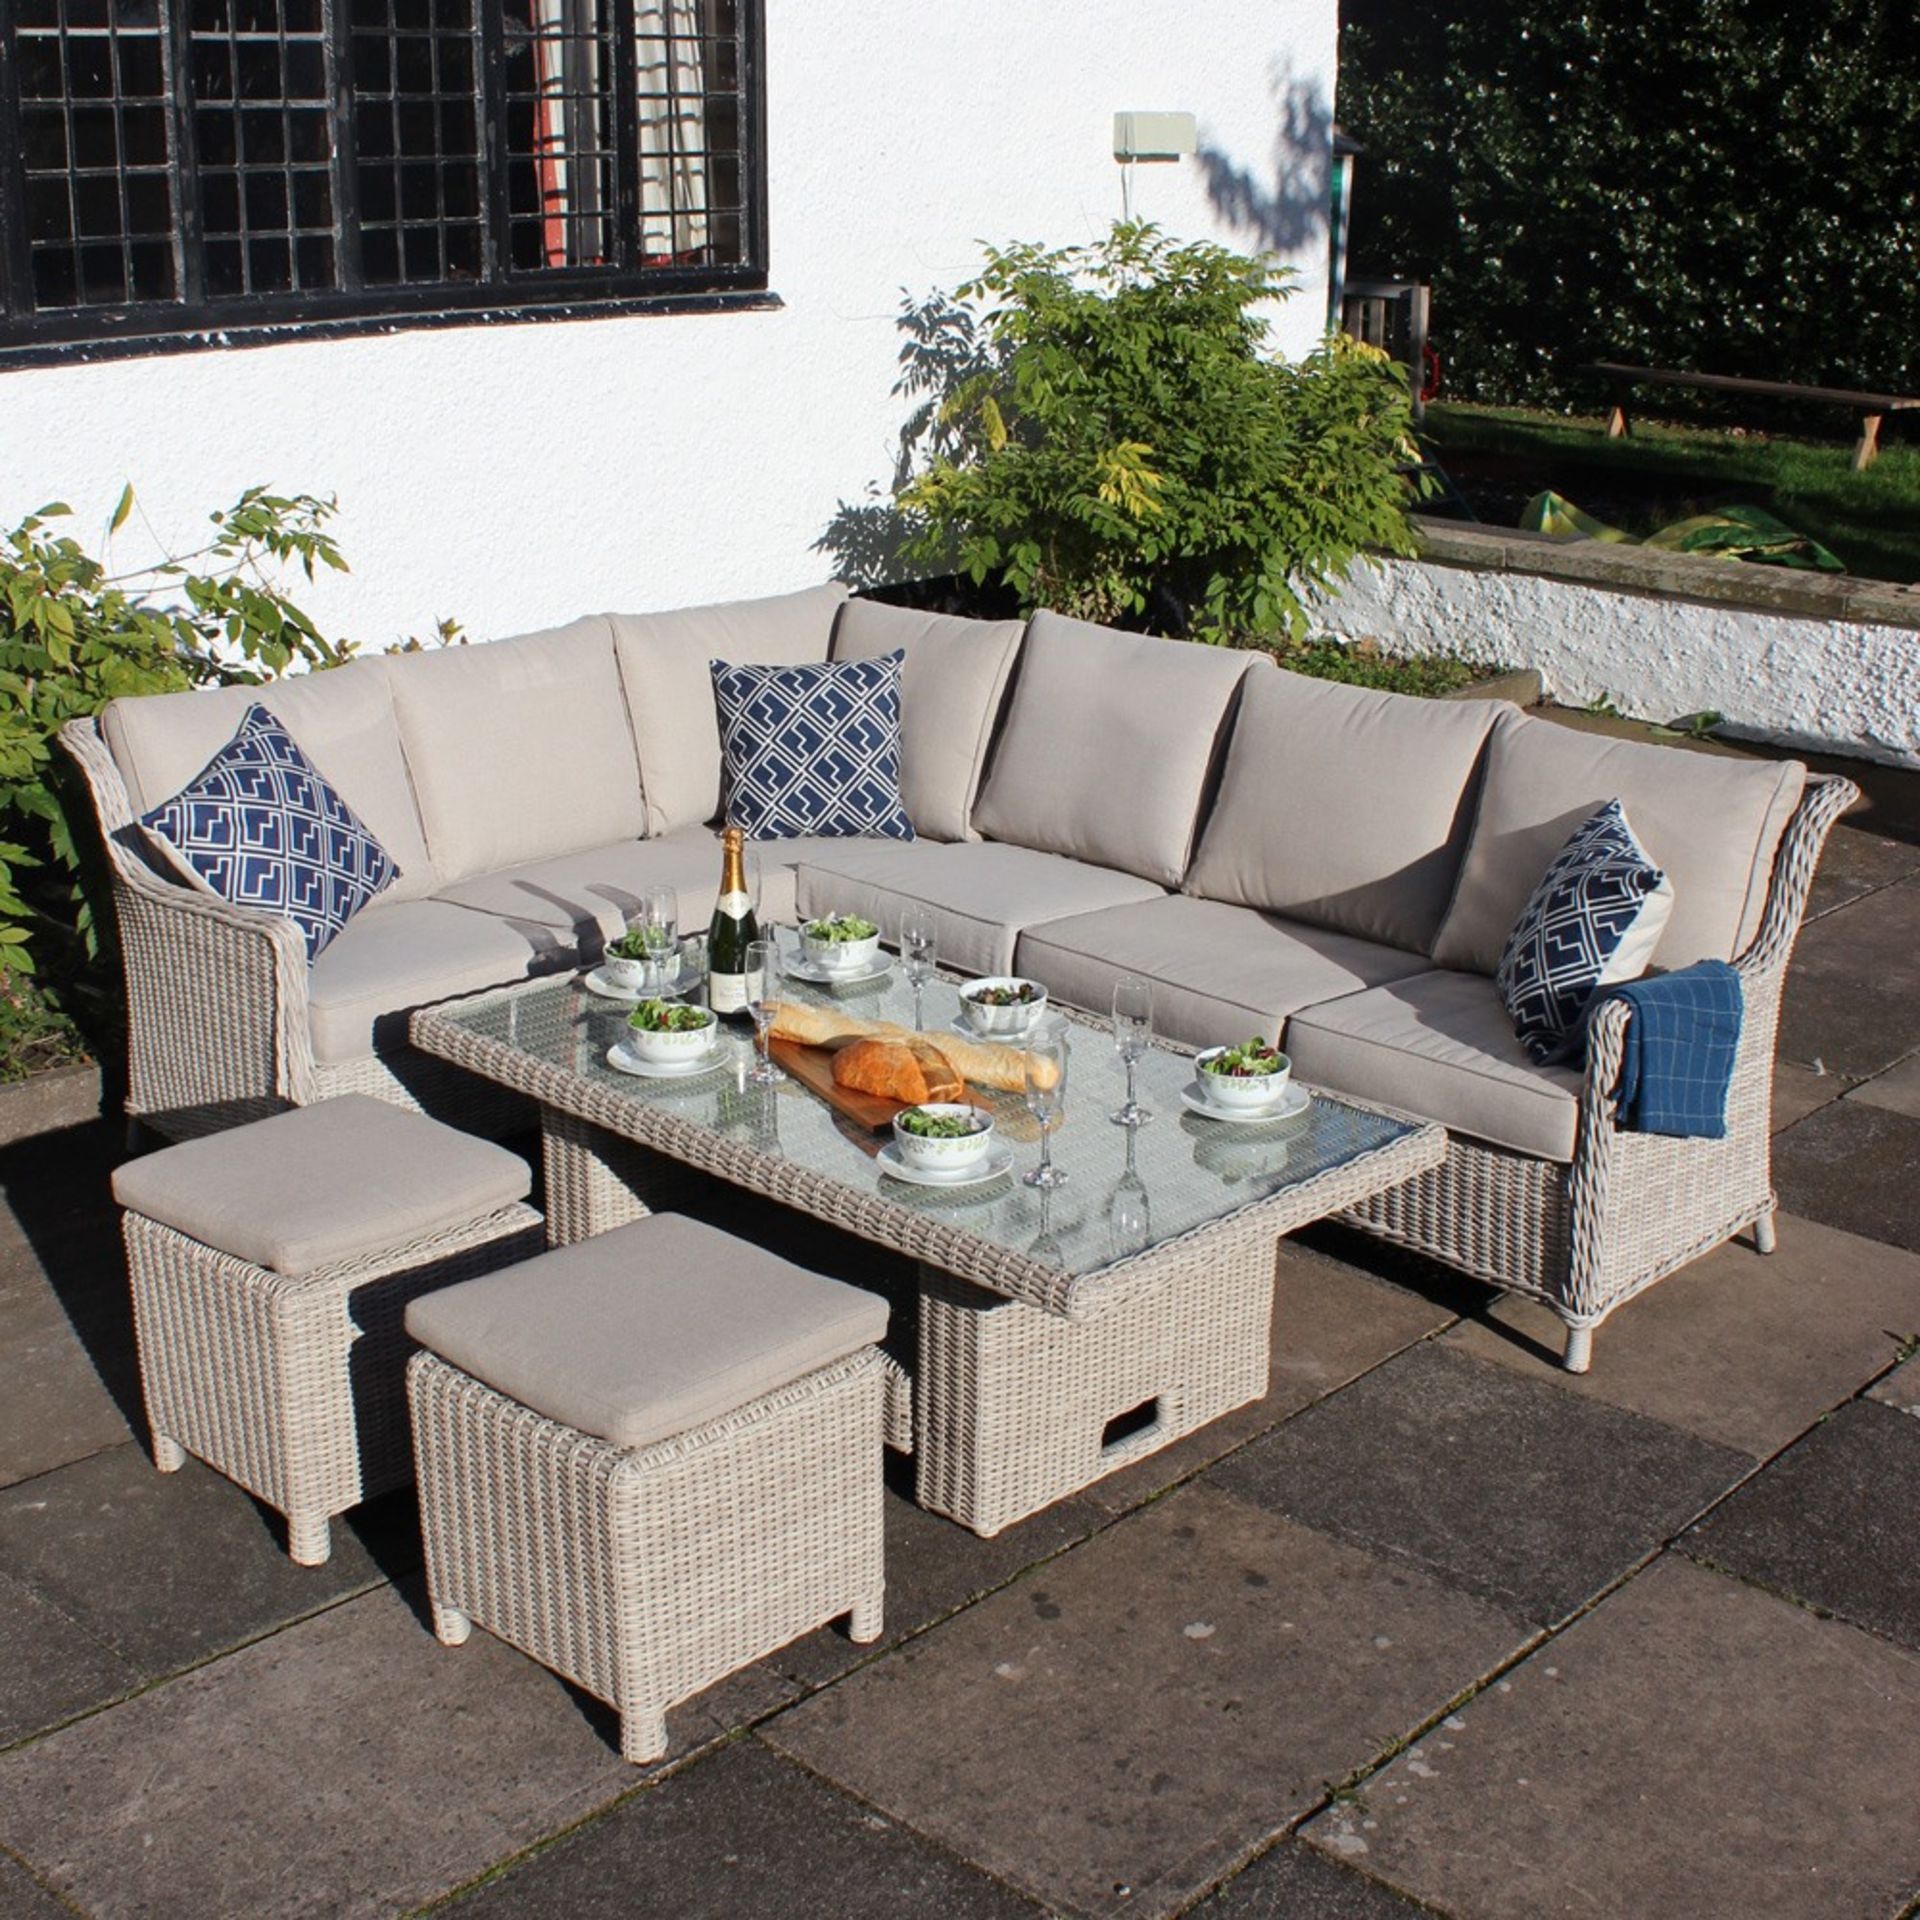 V Brand New Luxury Rattan Corner Dining Set With Adjustable Table - Includes Two Stools & Weather